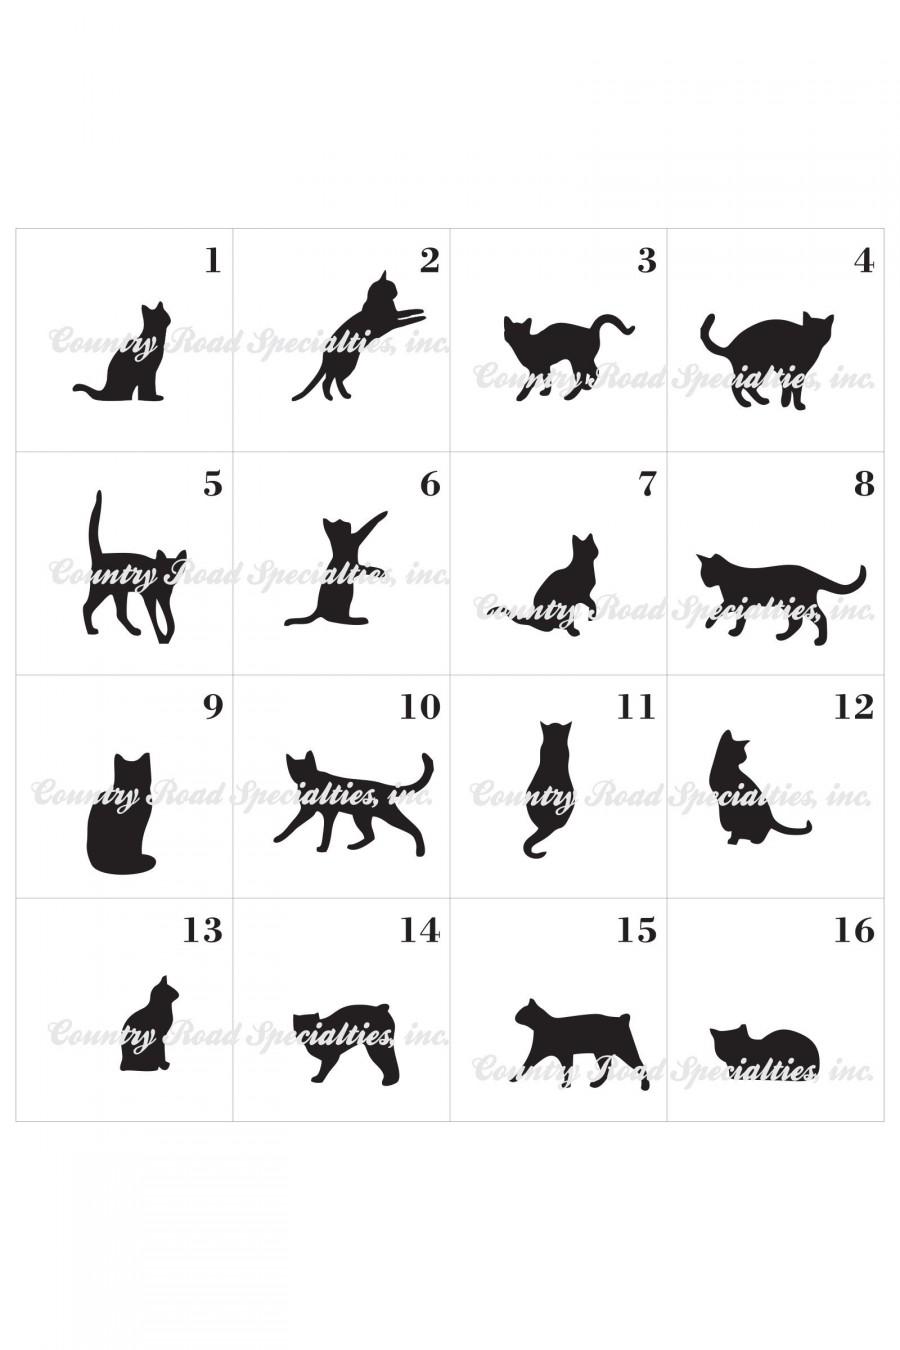 Wedding - Cat and Dog Pet Silhouette cake topper add on MADE IN USA